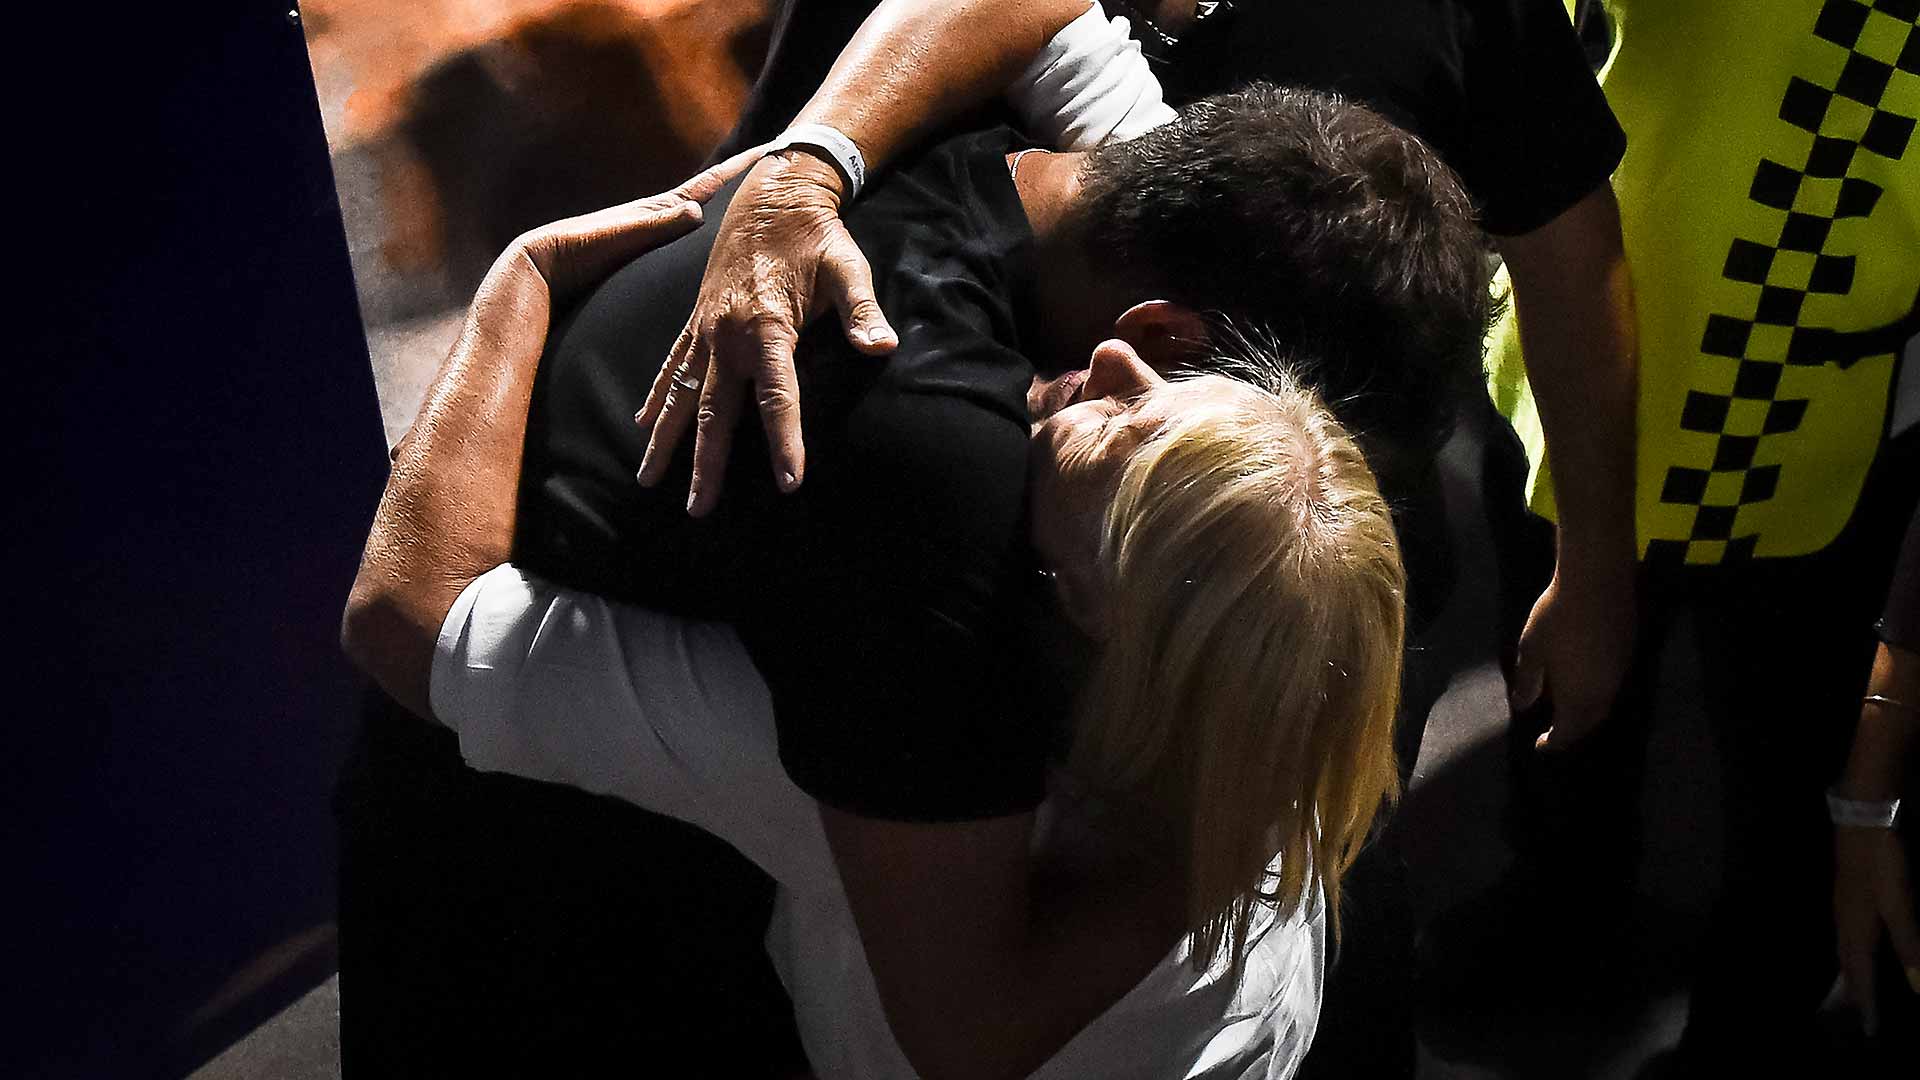 <a href='https://www.atptour.com/en/players/juan-martin-del-potro/d683/overview'>Juan Martin del Potro</a> embraces his mother, Patricia, after his likely final match in Buenos Aires.